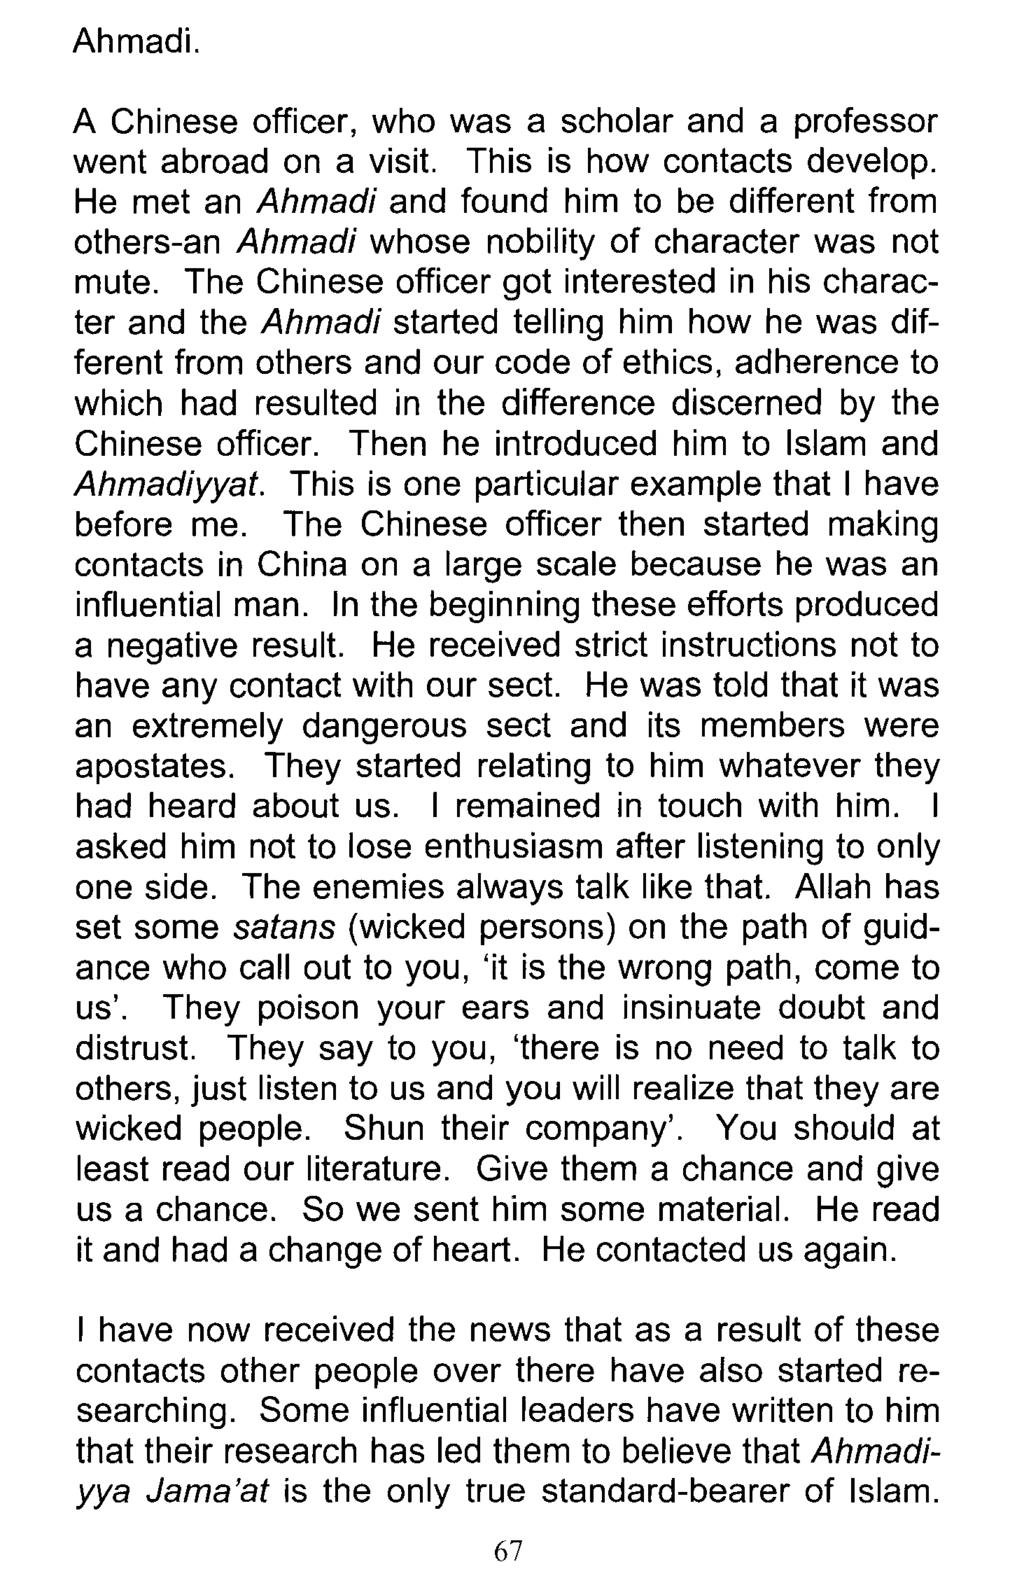 Ahmadi. A Chinese officer, who was a scholar and a professor went abroad on a visit. This is how contacts develop.